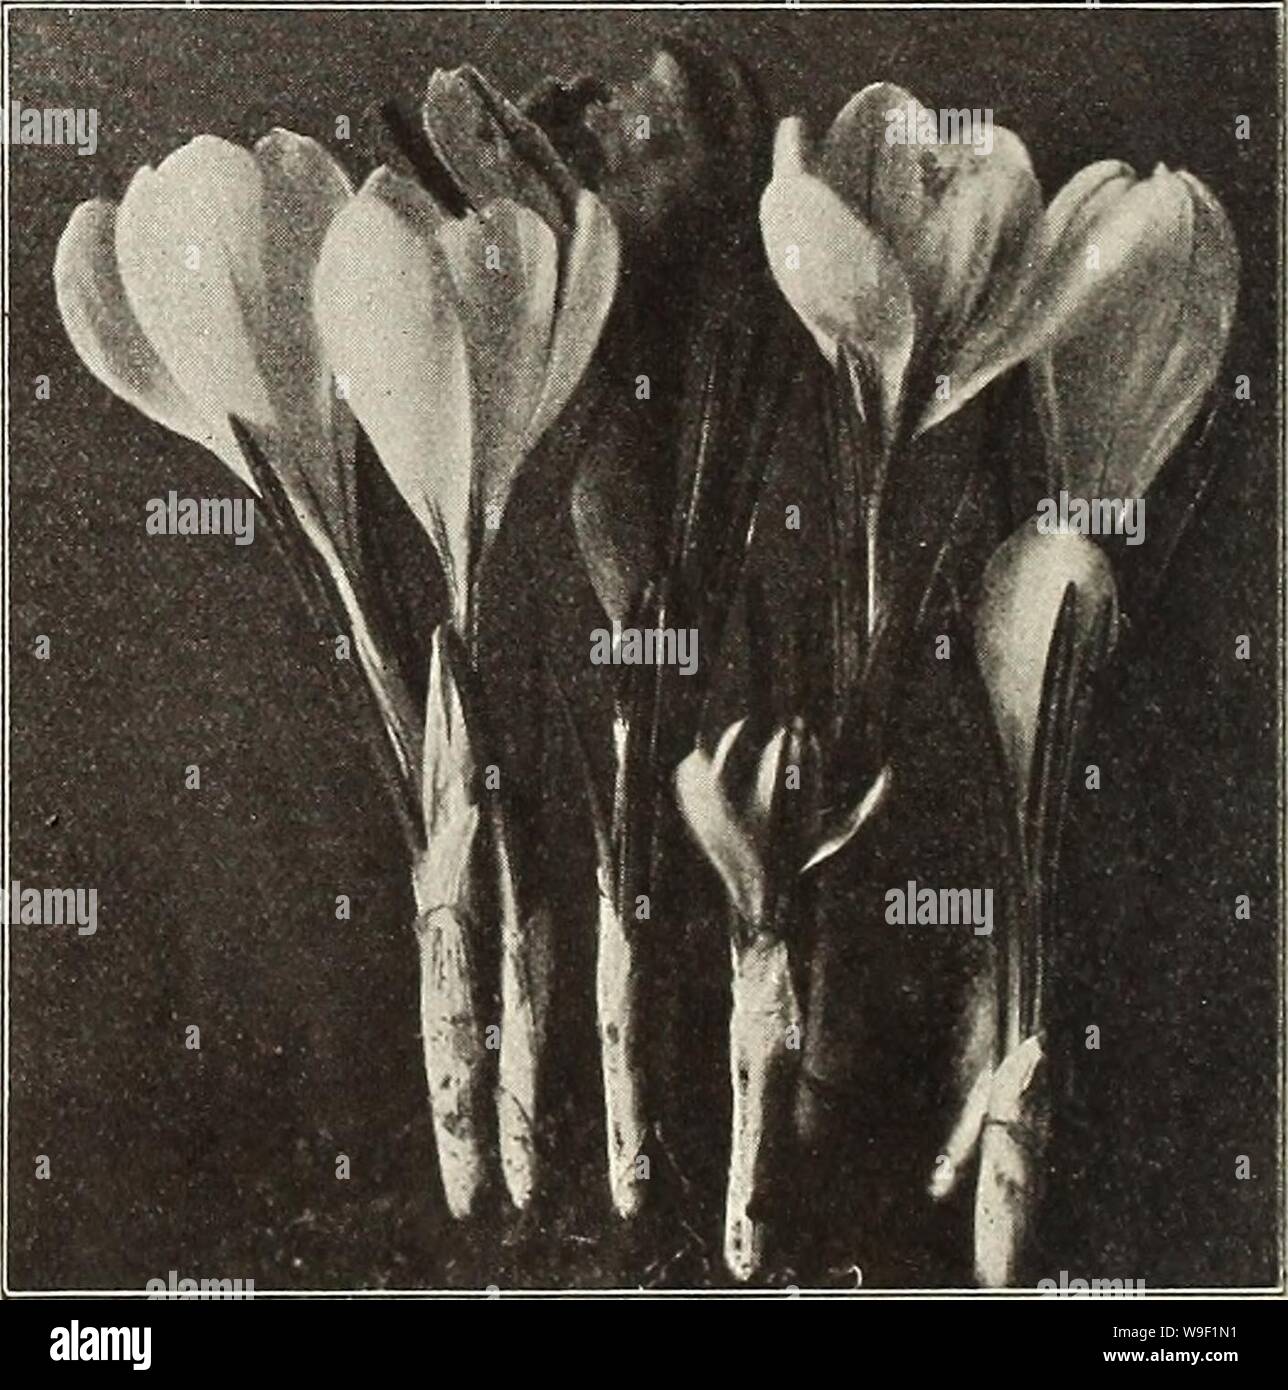 Archive image from page 9 of Currie's bulbs and plants . Currie's bulbs and plants : autumn 1912  curriesbulbsplan19curr 5 Year: 1912 ( ANEMONE. -. ..,,,.,. , , Each Doz. 100 St. Brigid (Irish Anemone)—A magnificent variety with large, semi-double, brilliant colored flowers In all shades from white to the brightest scarlet, blue, mauve, maroon, striped, etc., borne freely on long stems, and are excellent for cut flowers. The tubers may be planted In fall outdoors in sheltered places if well protected $ .04 .40 2.50 Single (The Bride)—Pure white 02 .20 1.25 Single (Fulgens)—The most brilliant o Stock Photo